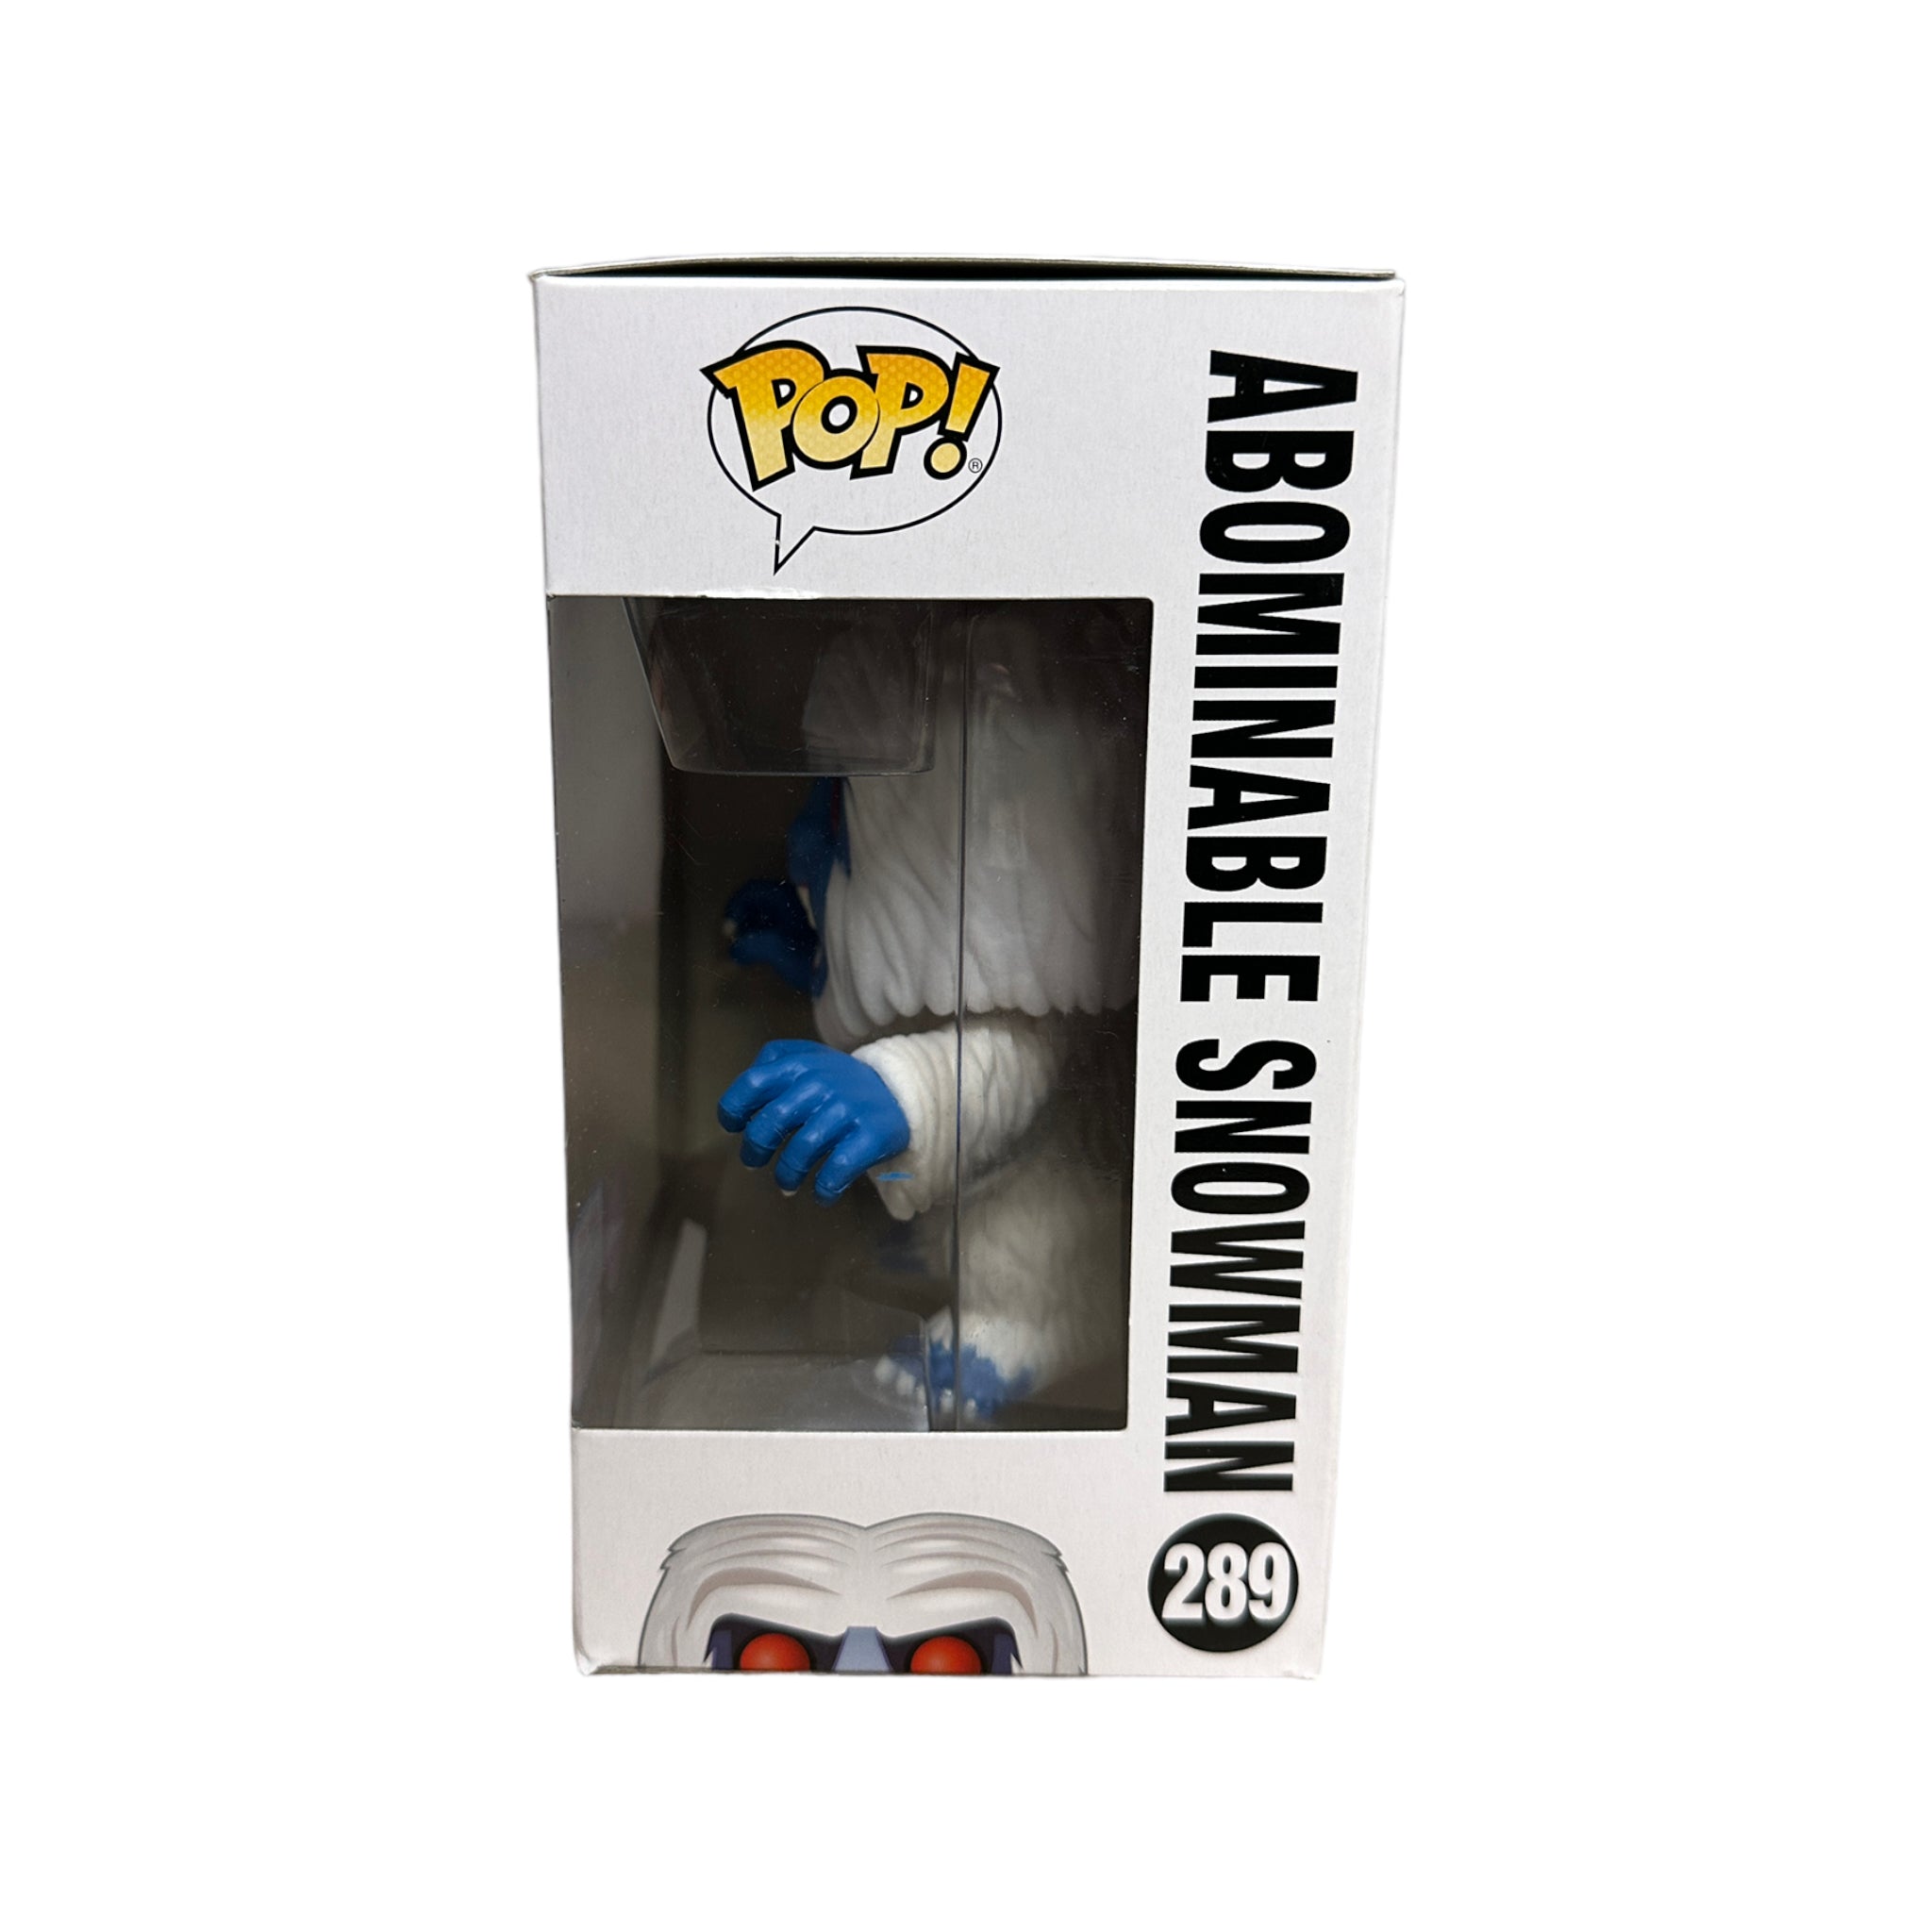 Abominable Snowman #289 (Flocked) Funko Pop! - Matterhorn Bobsleds - NYCC 2017 Exclusive LE1000 Pcs - Condition 7/10